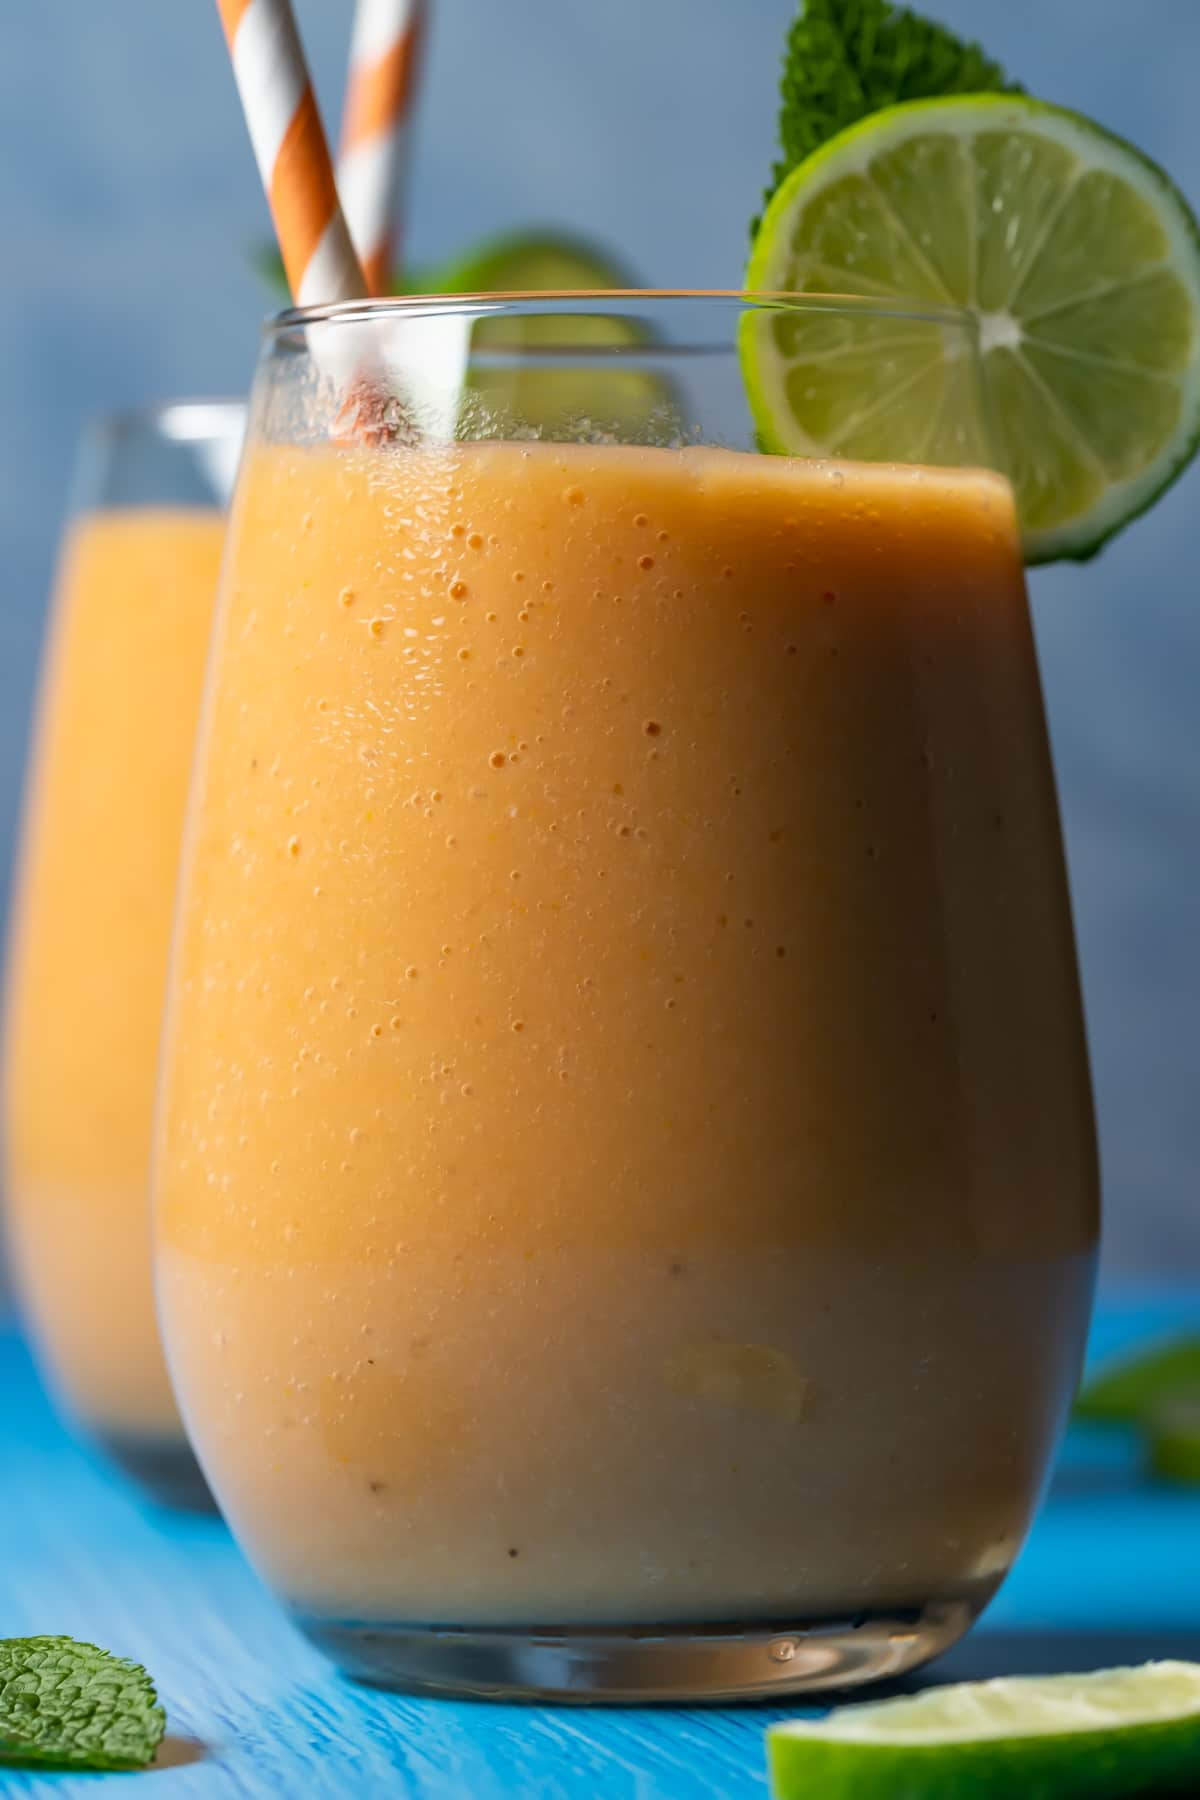 Papaya smoothie in glasses with mint leaves, fresh lime and striped straws.